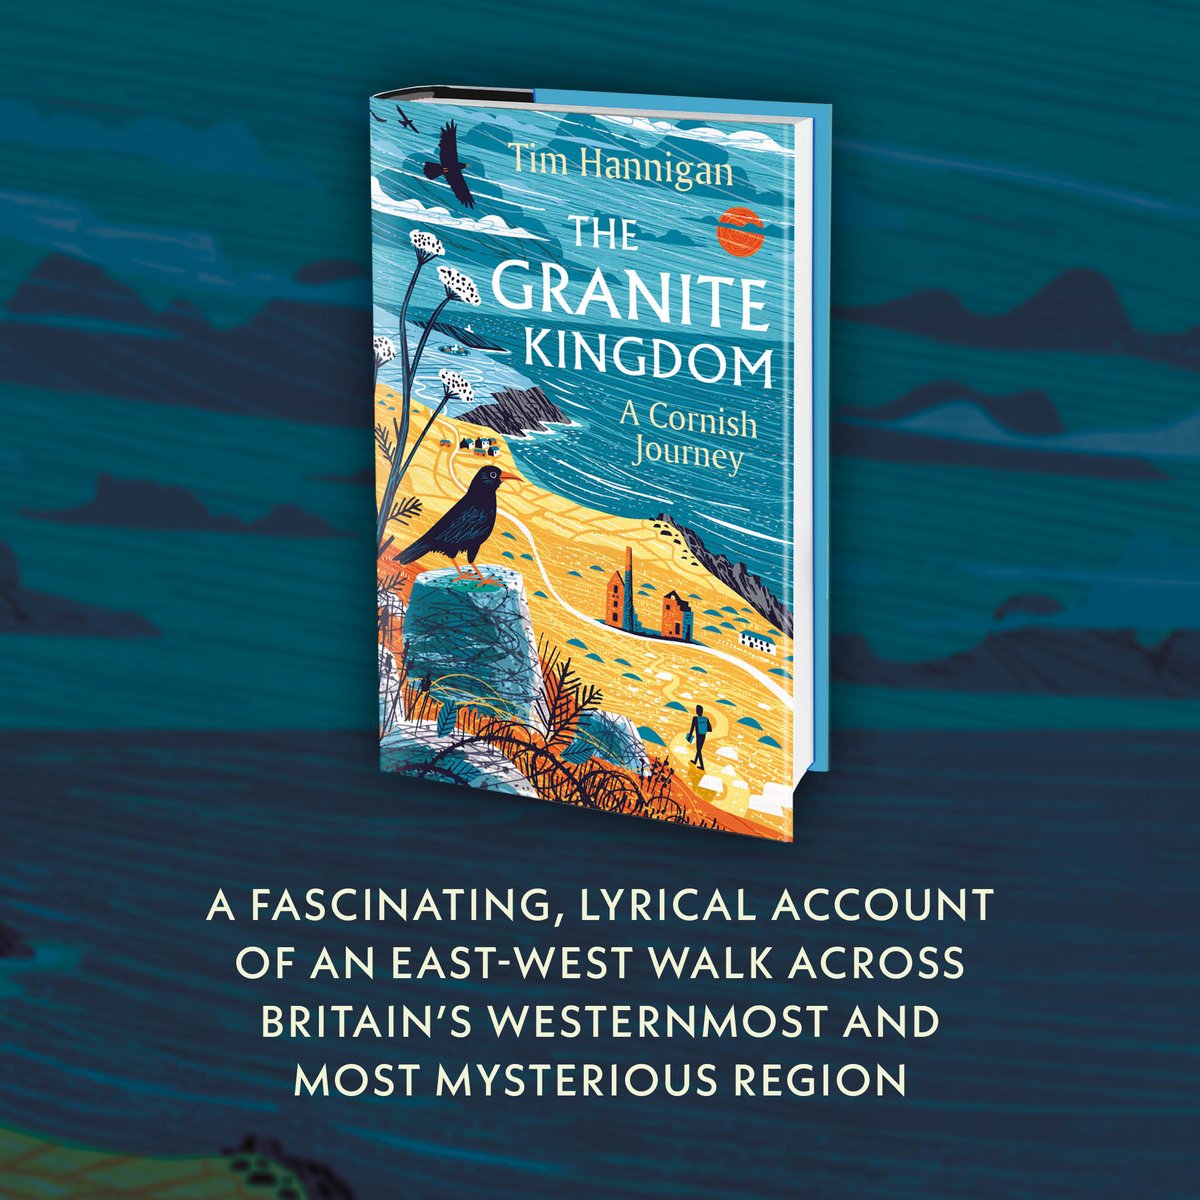 Millions of visitors arrive in Cornwall each year harbouring potent images of the place. But where does our popular idea of Cornwall come from? 

#TheGraniteKingdom by @Tim_Hannigan takes you on a tour through history, myth, folklore and geography 👉  amzn.to/443j4mk